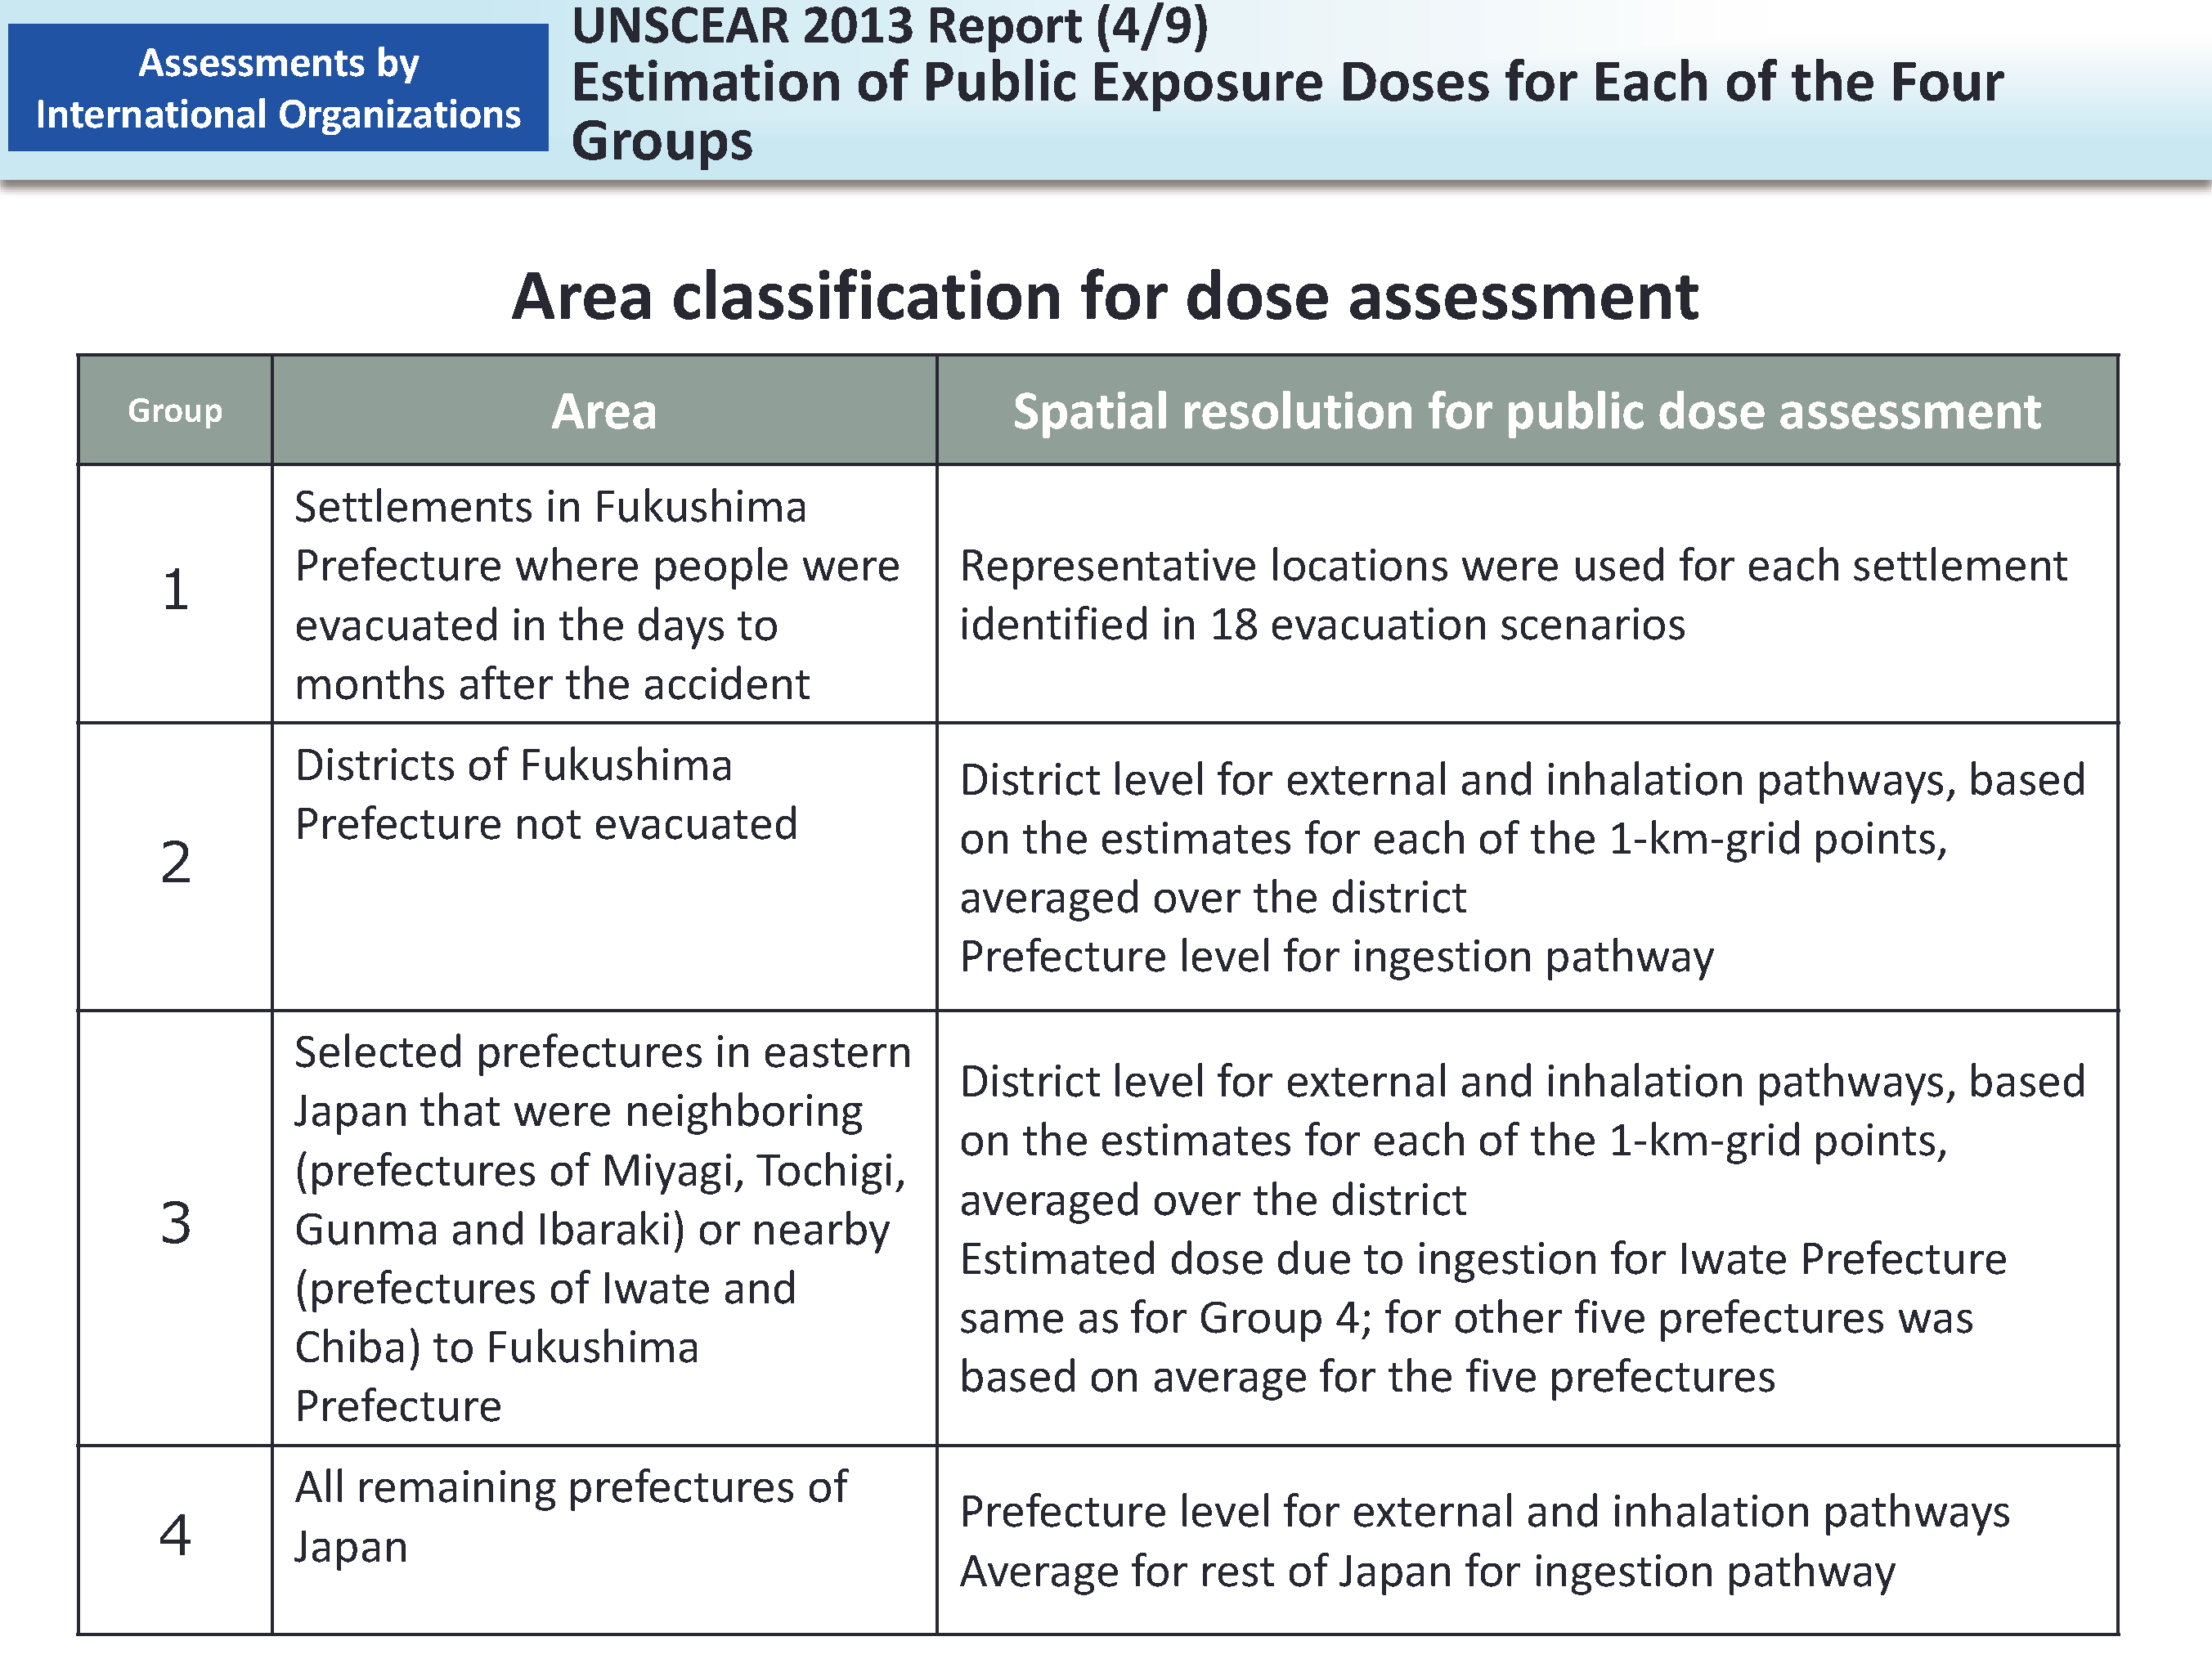 UNSCEAR 2013 Report (4/9) Estimation of Public Exposure Doses for Each of the Four Groups_Figure